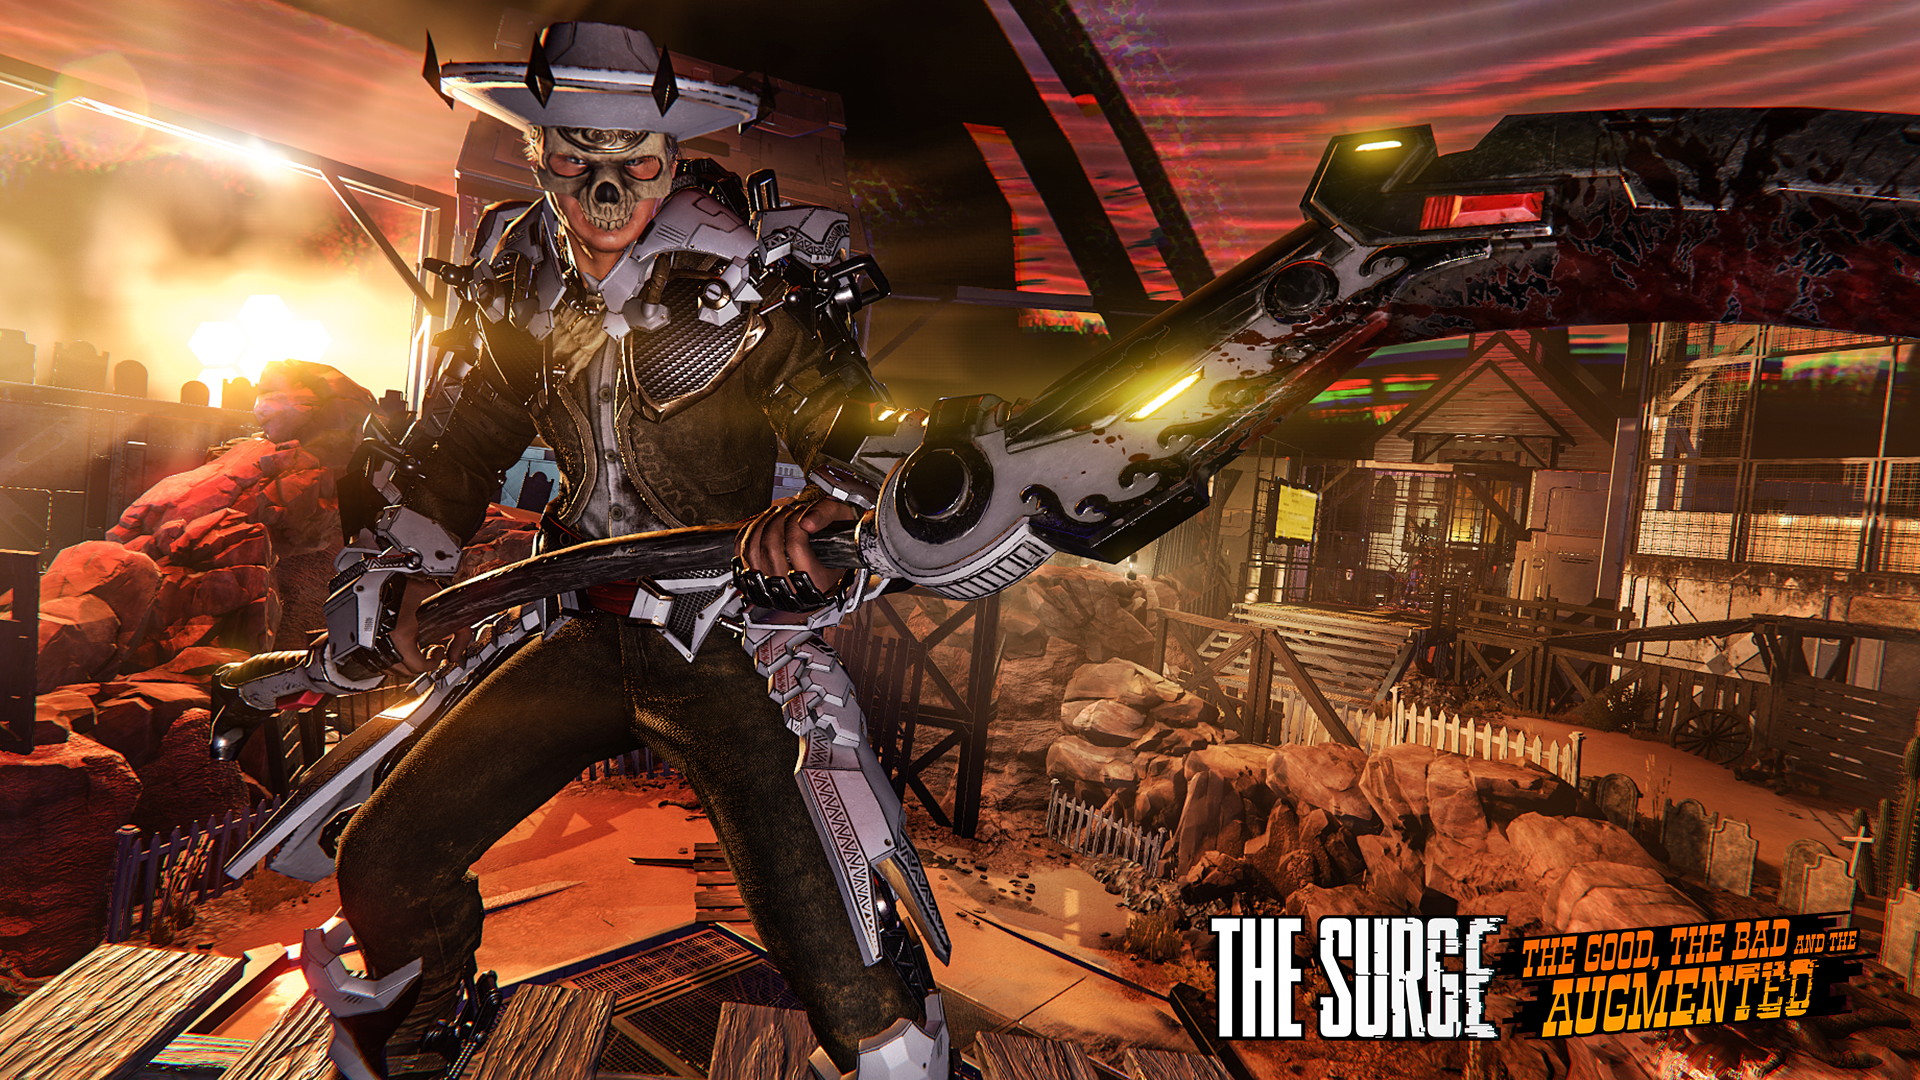 The Surge: The Good, the Bad, and the Augmented - screenshot 1